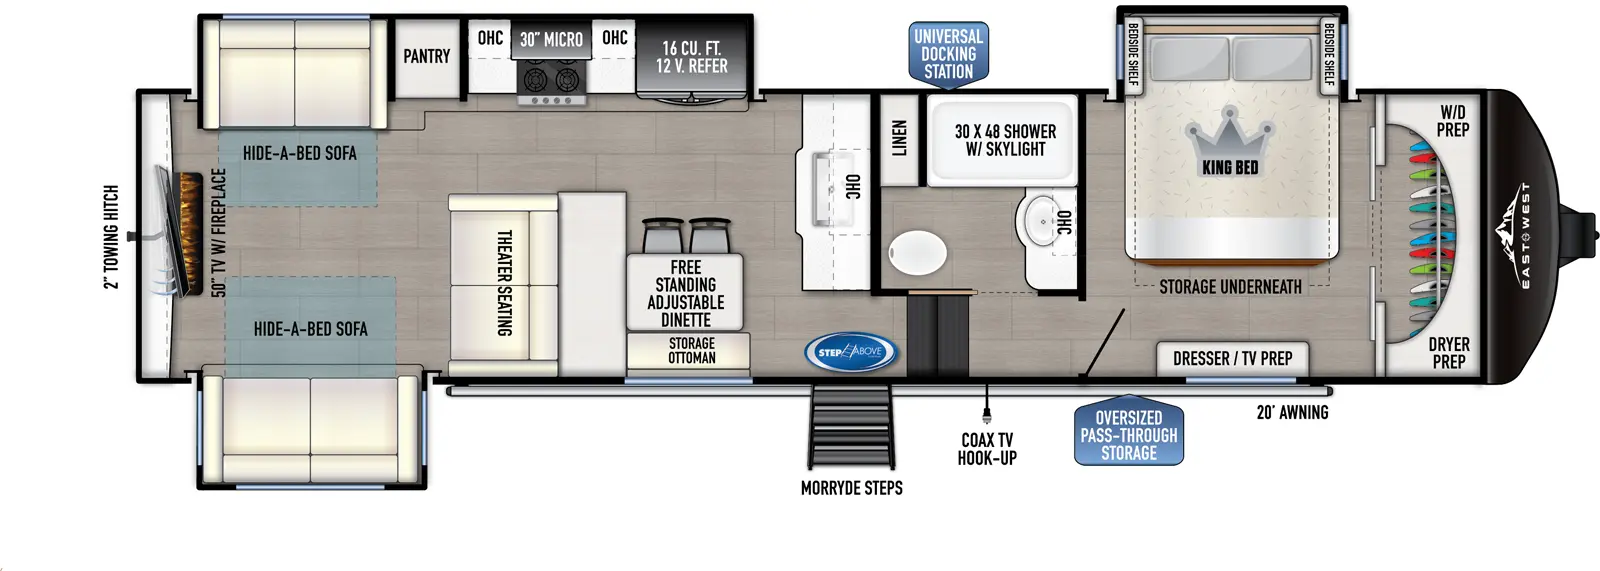 The 340RD has 3 slideouts and one entry. Exterior features an oversized pass through storage, universal docking station, MORryde steps, coax TV hookup, 20 foot awning, and 2 inch towing hitch. Interior layout front to back: front closet with washer/dryer prep, off-door side king bed slideout with storage underneath, and door side dresser with TV prep; off-door side full bathroom with overhead cabinet, linen closet, and shower with skylight; steps down to main living area and entry; kitchen counter with sink and overhead cabinet along inner wall; off-door side slideout with 12V refrigerator, overhead cabinet, microwave, cooktop, pantry, and hide-a-bed sofa; door side free-standing adjustable dinette with storage ottoman, counter, theater seating, and a hide-a-bed sofa slideout; rear TV with fireplace.